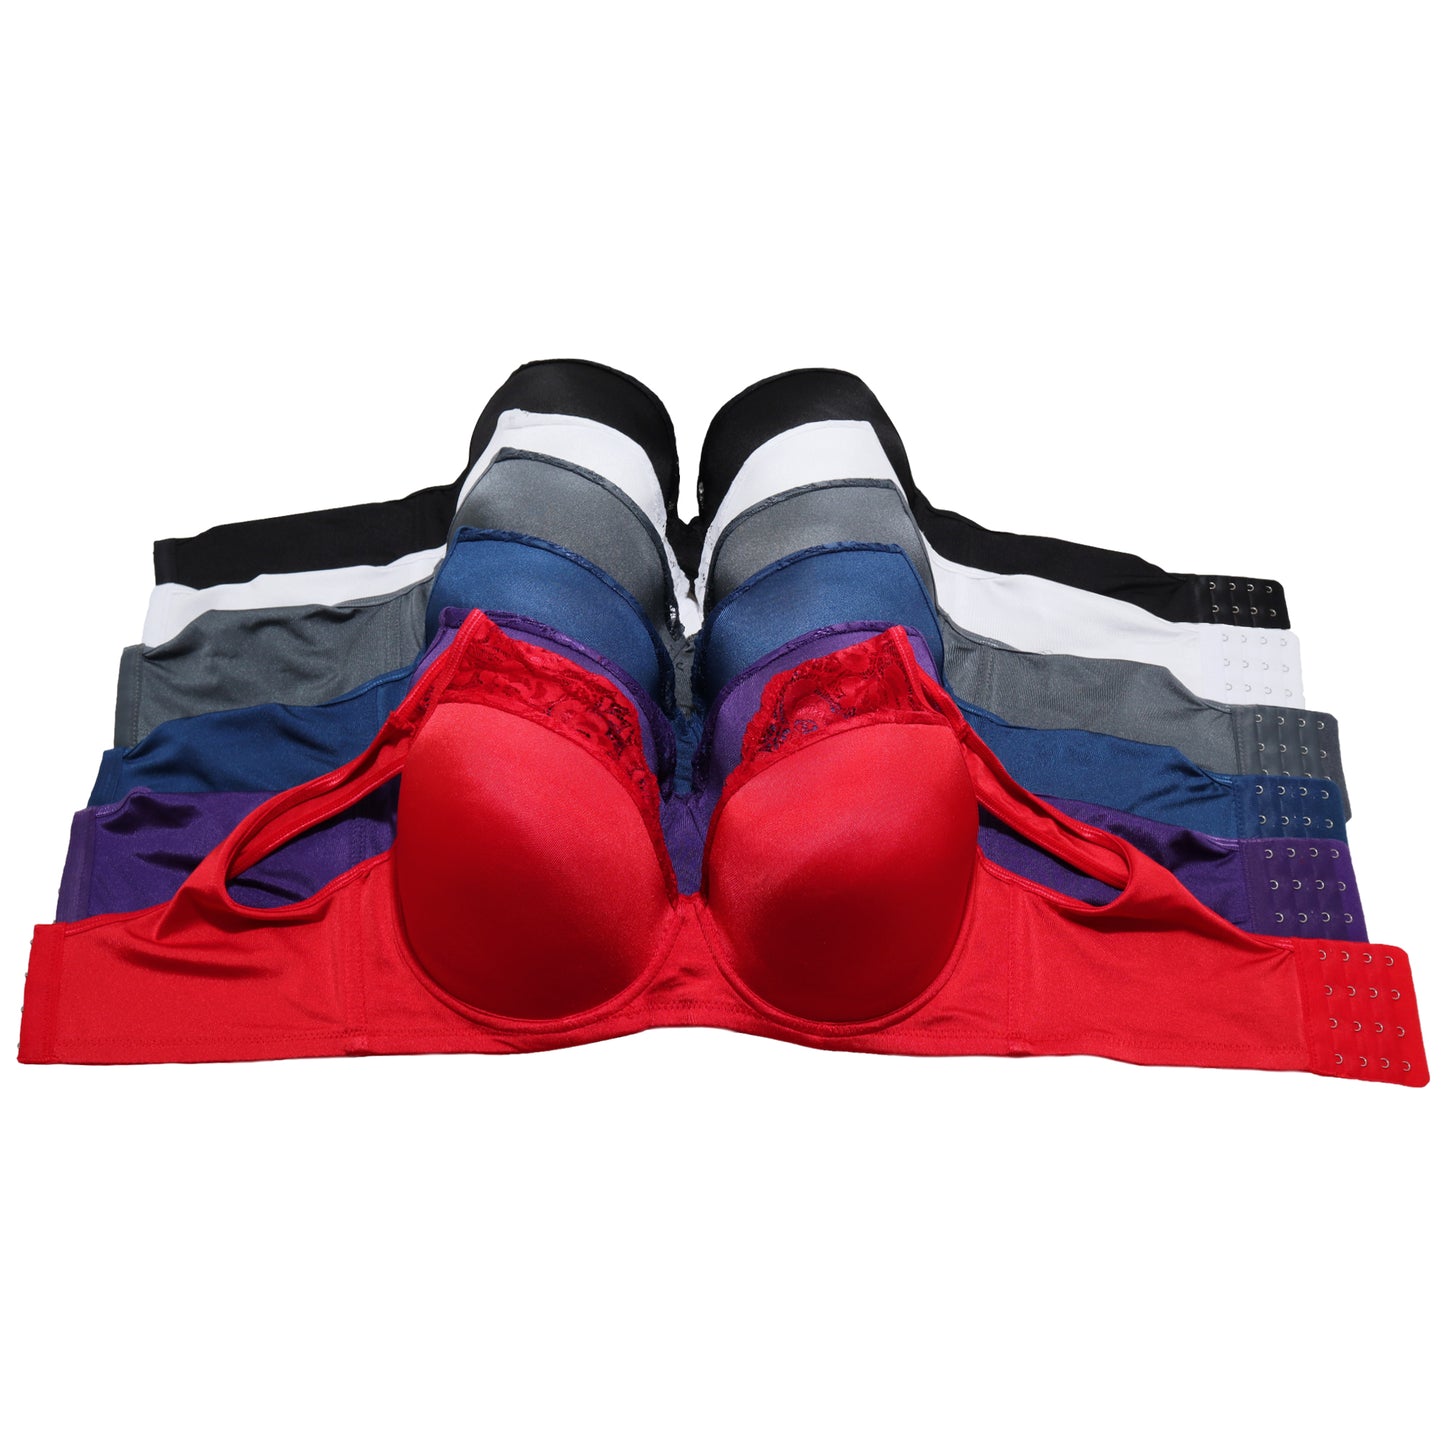 Wired, Padded D-DD-DDD Cup Bras with Lace Accent Straps (6-Pack)